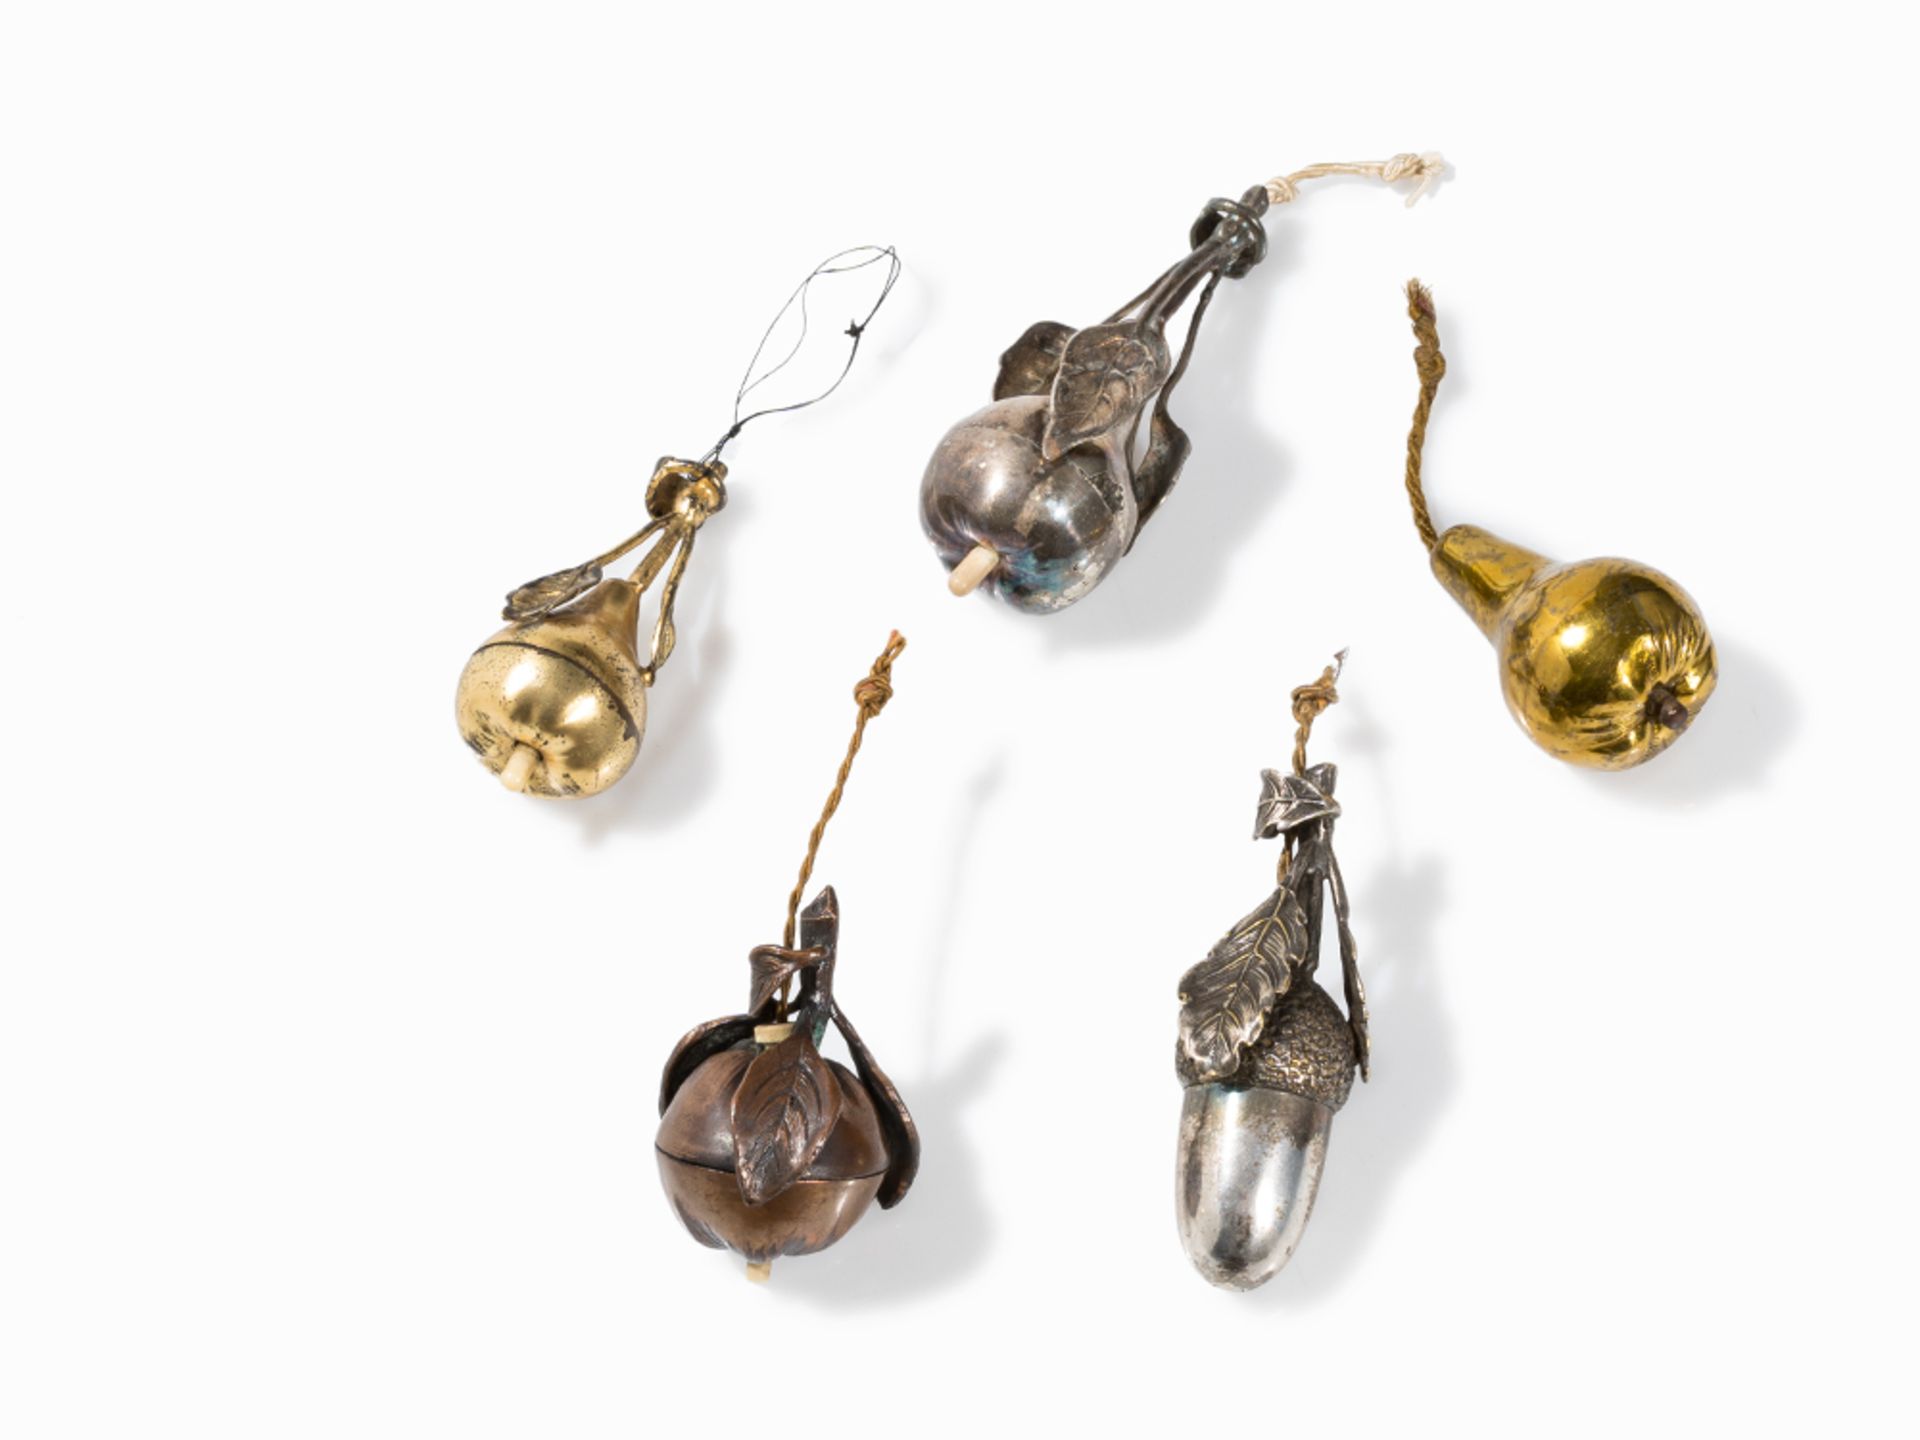 5 Hanging Bell Pusher in the Shape of Vegetal Elements, 20th C.